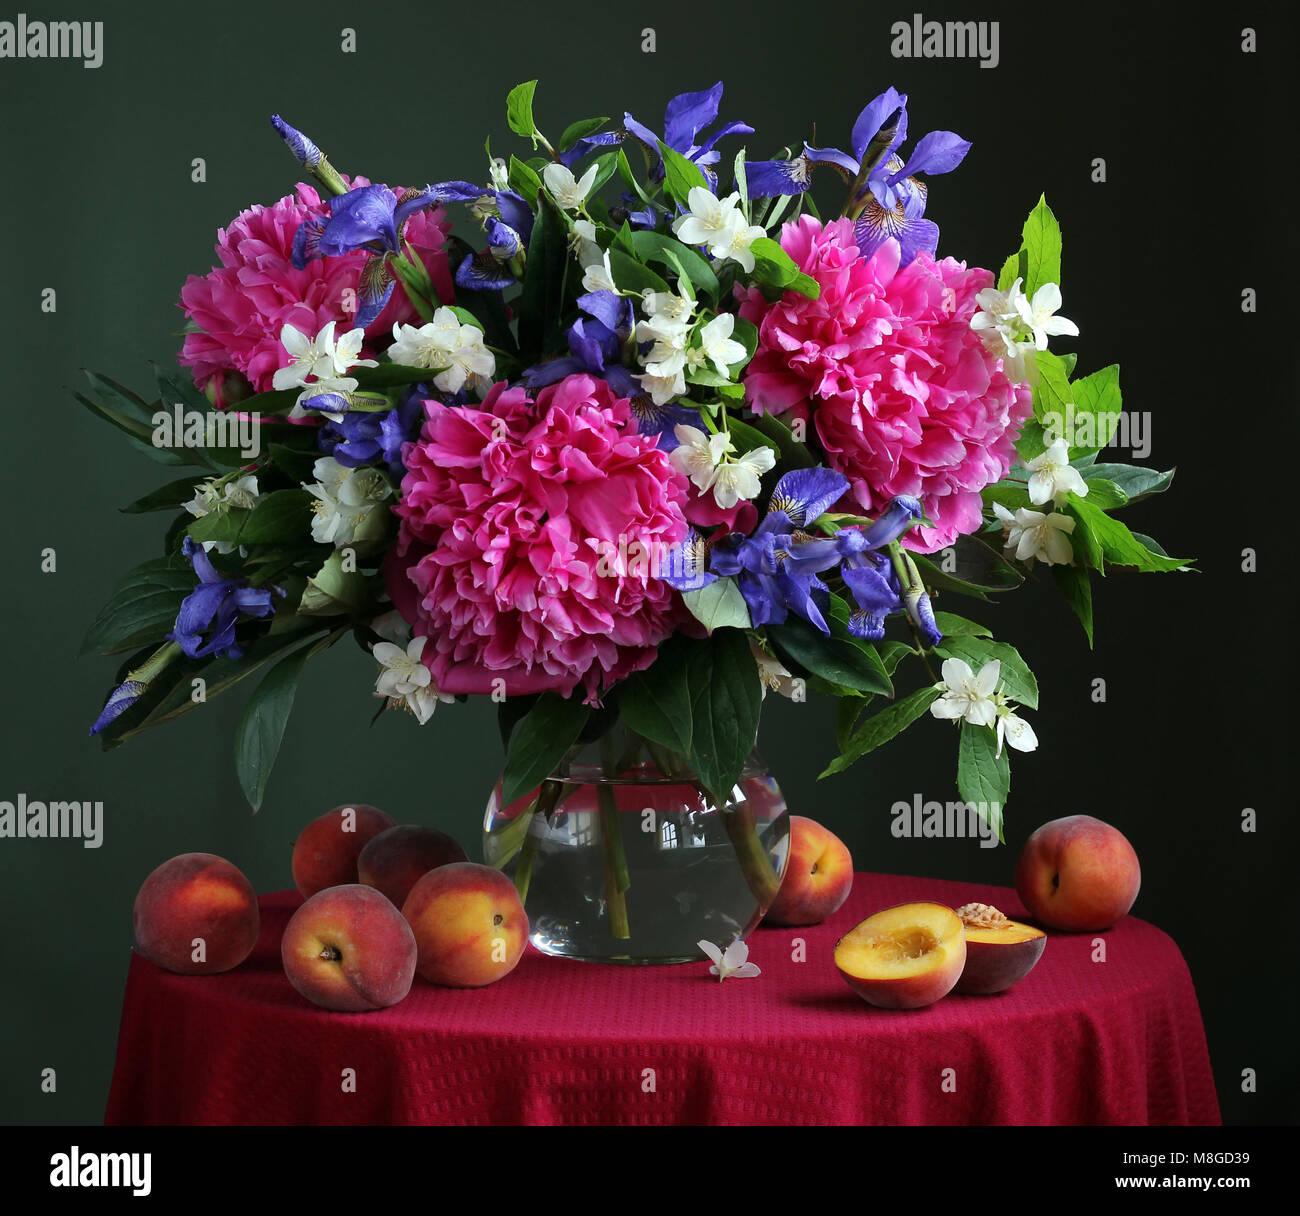 Bouquet of cultivated flowers in the jug and peaches on a round table with a red tablecloth. Still life with peonies, Jasmine and iris. Stock Photo